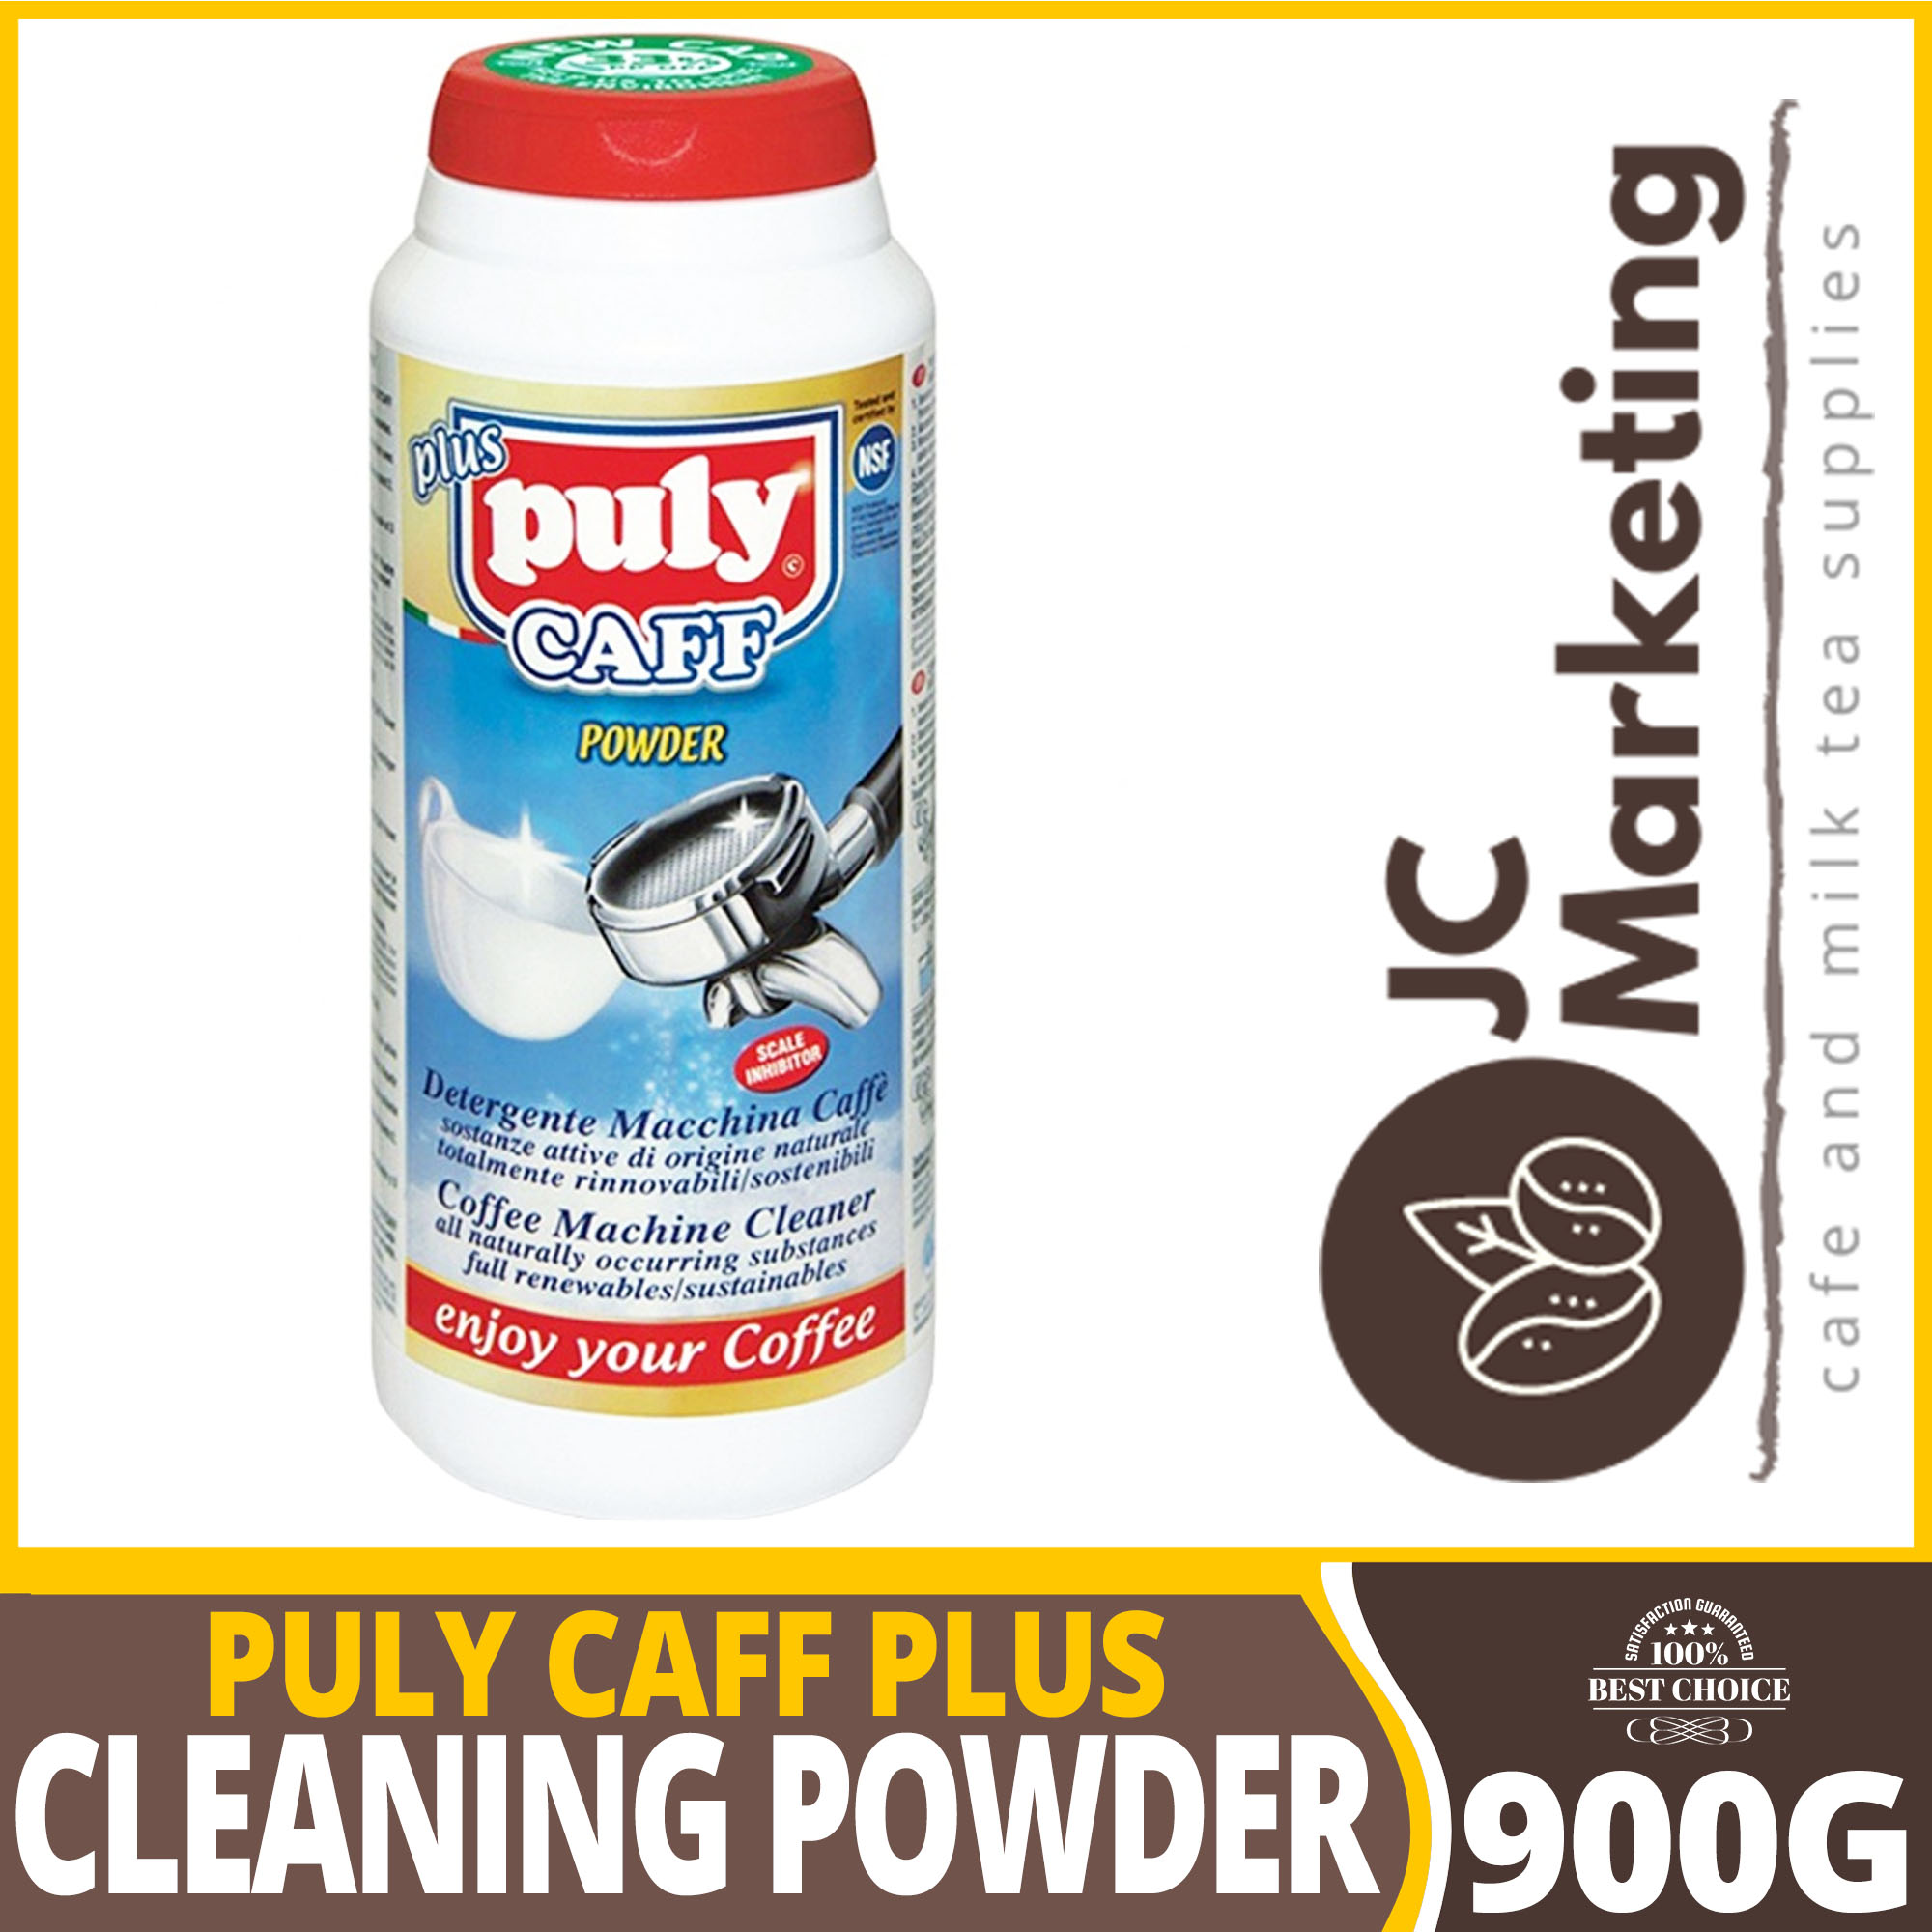 Puly Caff Plus Cleaning Powder 900g Coffee Machine Cleaning